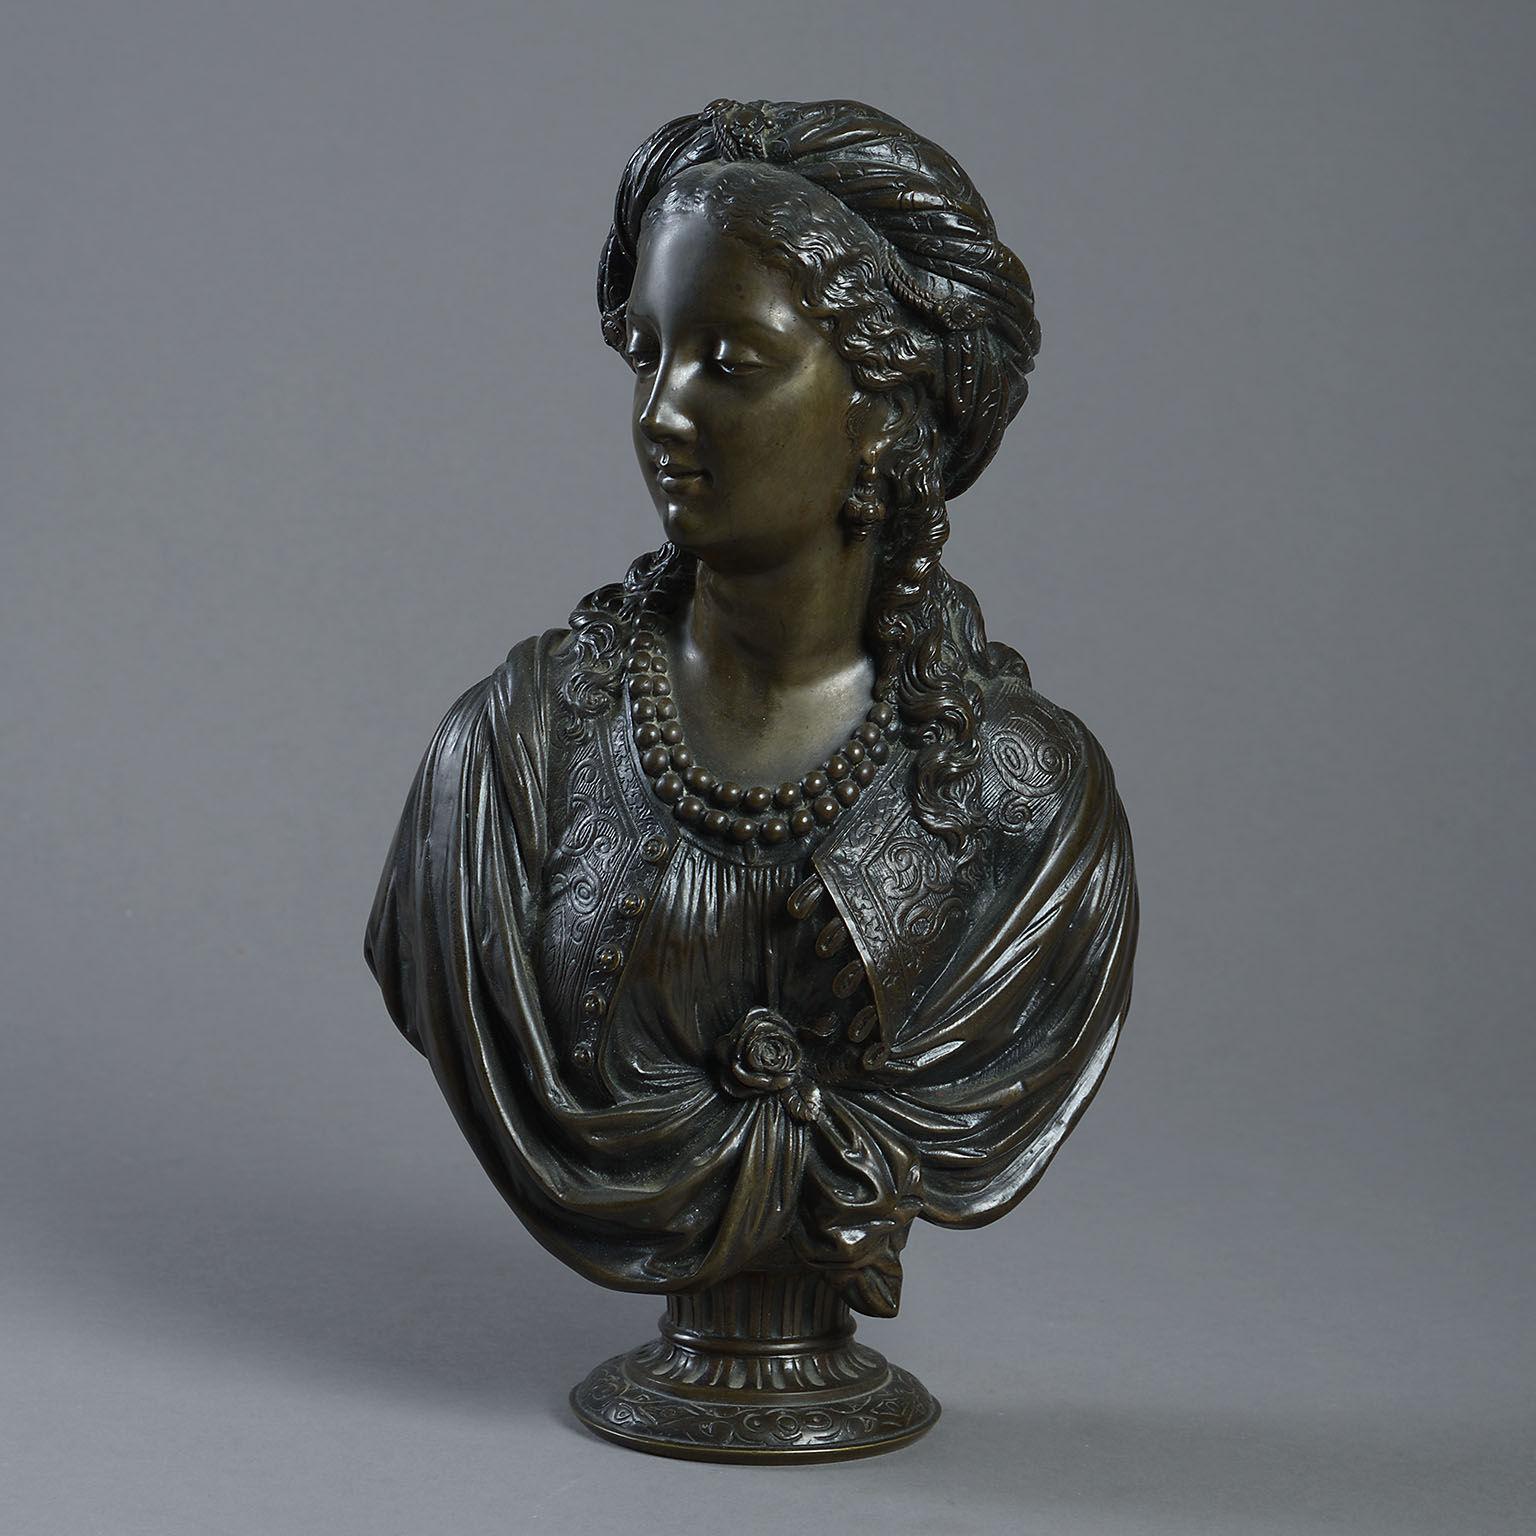 19th century bronze bust after Boizot depicting a lady wearing oriental dress modeled in exquisite detail in the Louis XVI style and with a wonderful patination.

Boizot was the son of Antoine Boizot, a designer at the Gobelins manufacture of